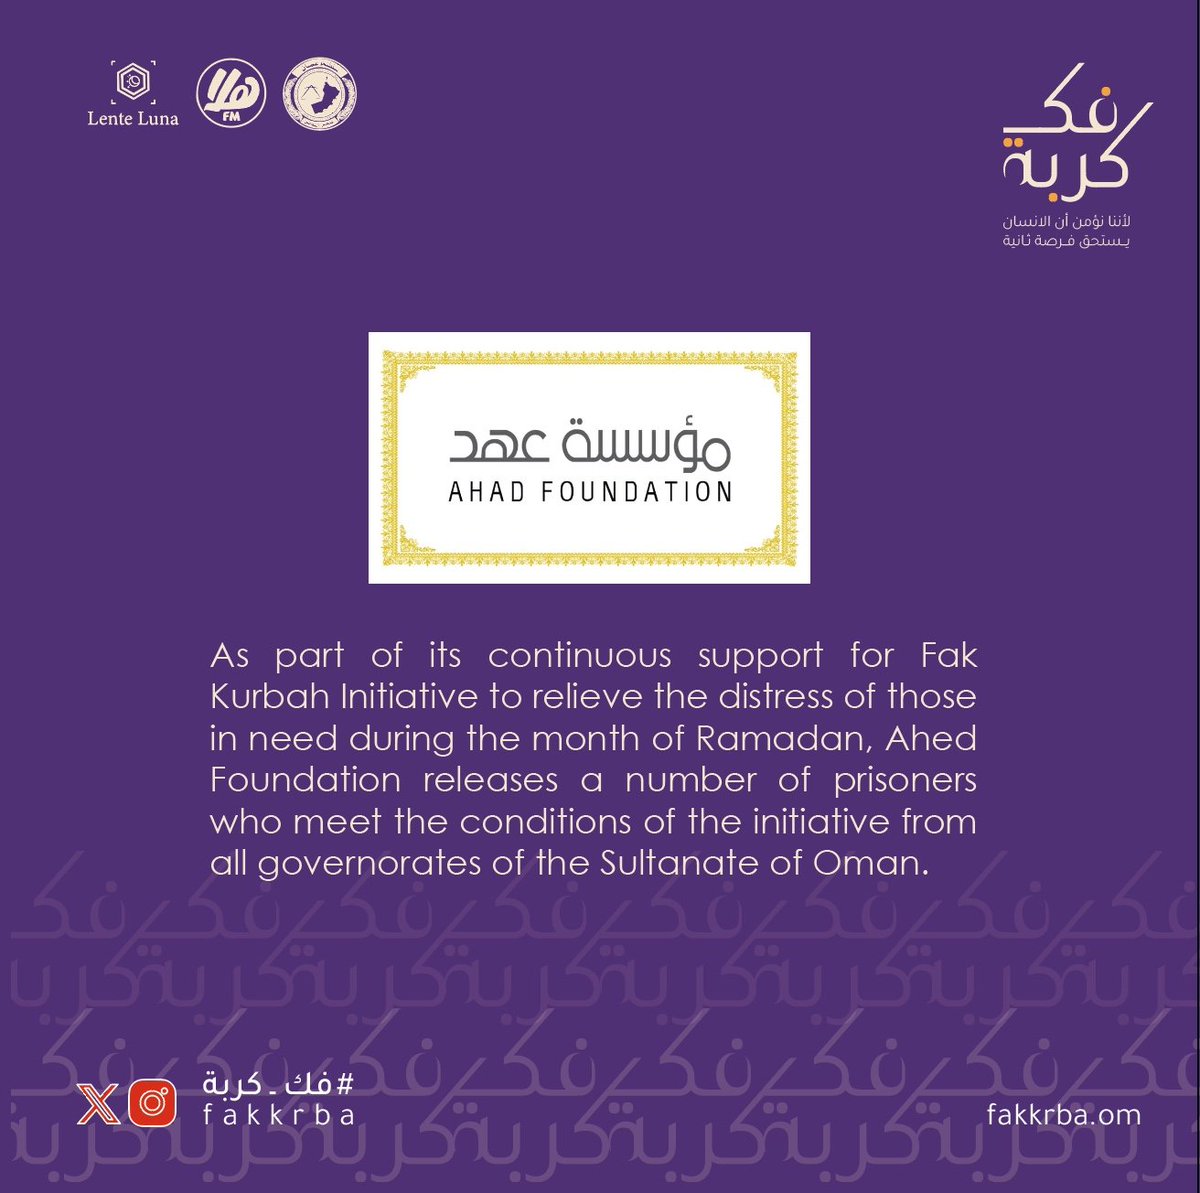 As part of its continuous support for #FakKurbah Initiative to relieve the distress of those in need during the month of Ramadan, Ahed Foundation releases a number of prisoners who meet the conditions of the initiative from all governorates of the Sultanate of Oman.